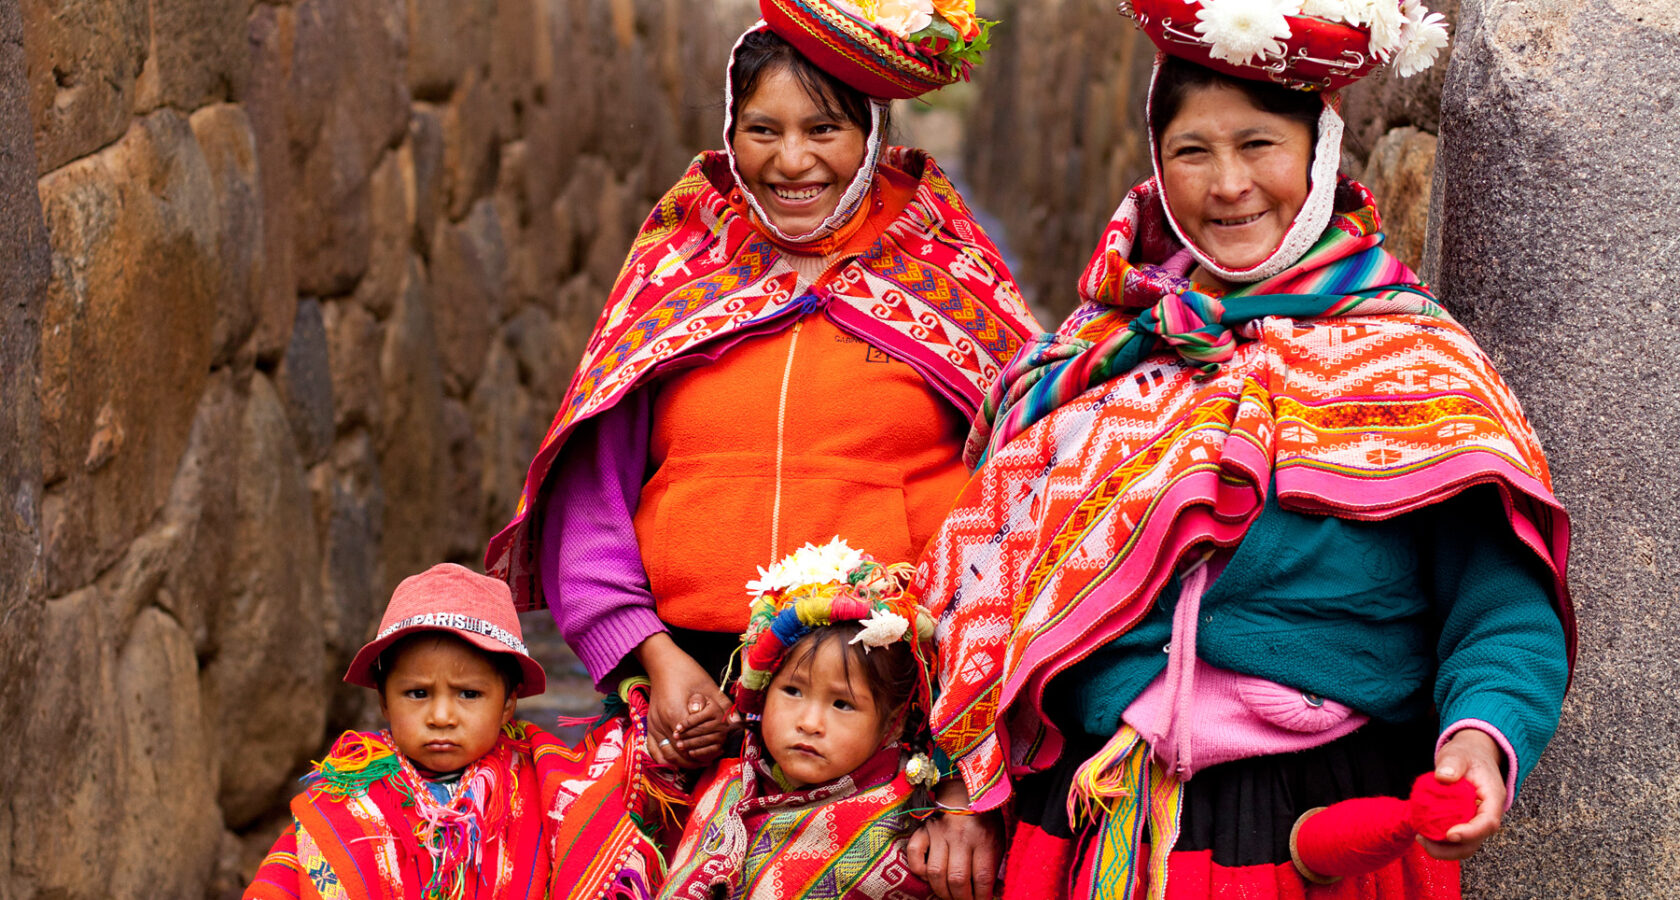 Two Peruvian women and two children adorned with Peruvian hand-crafted clothing and knit blankets pose for a photo.